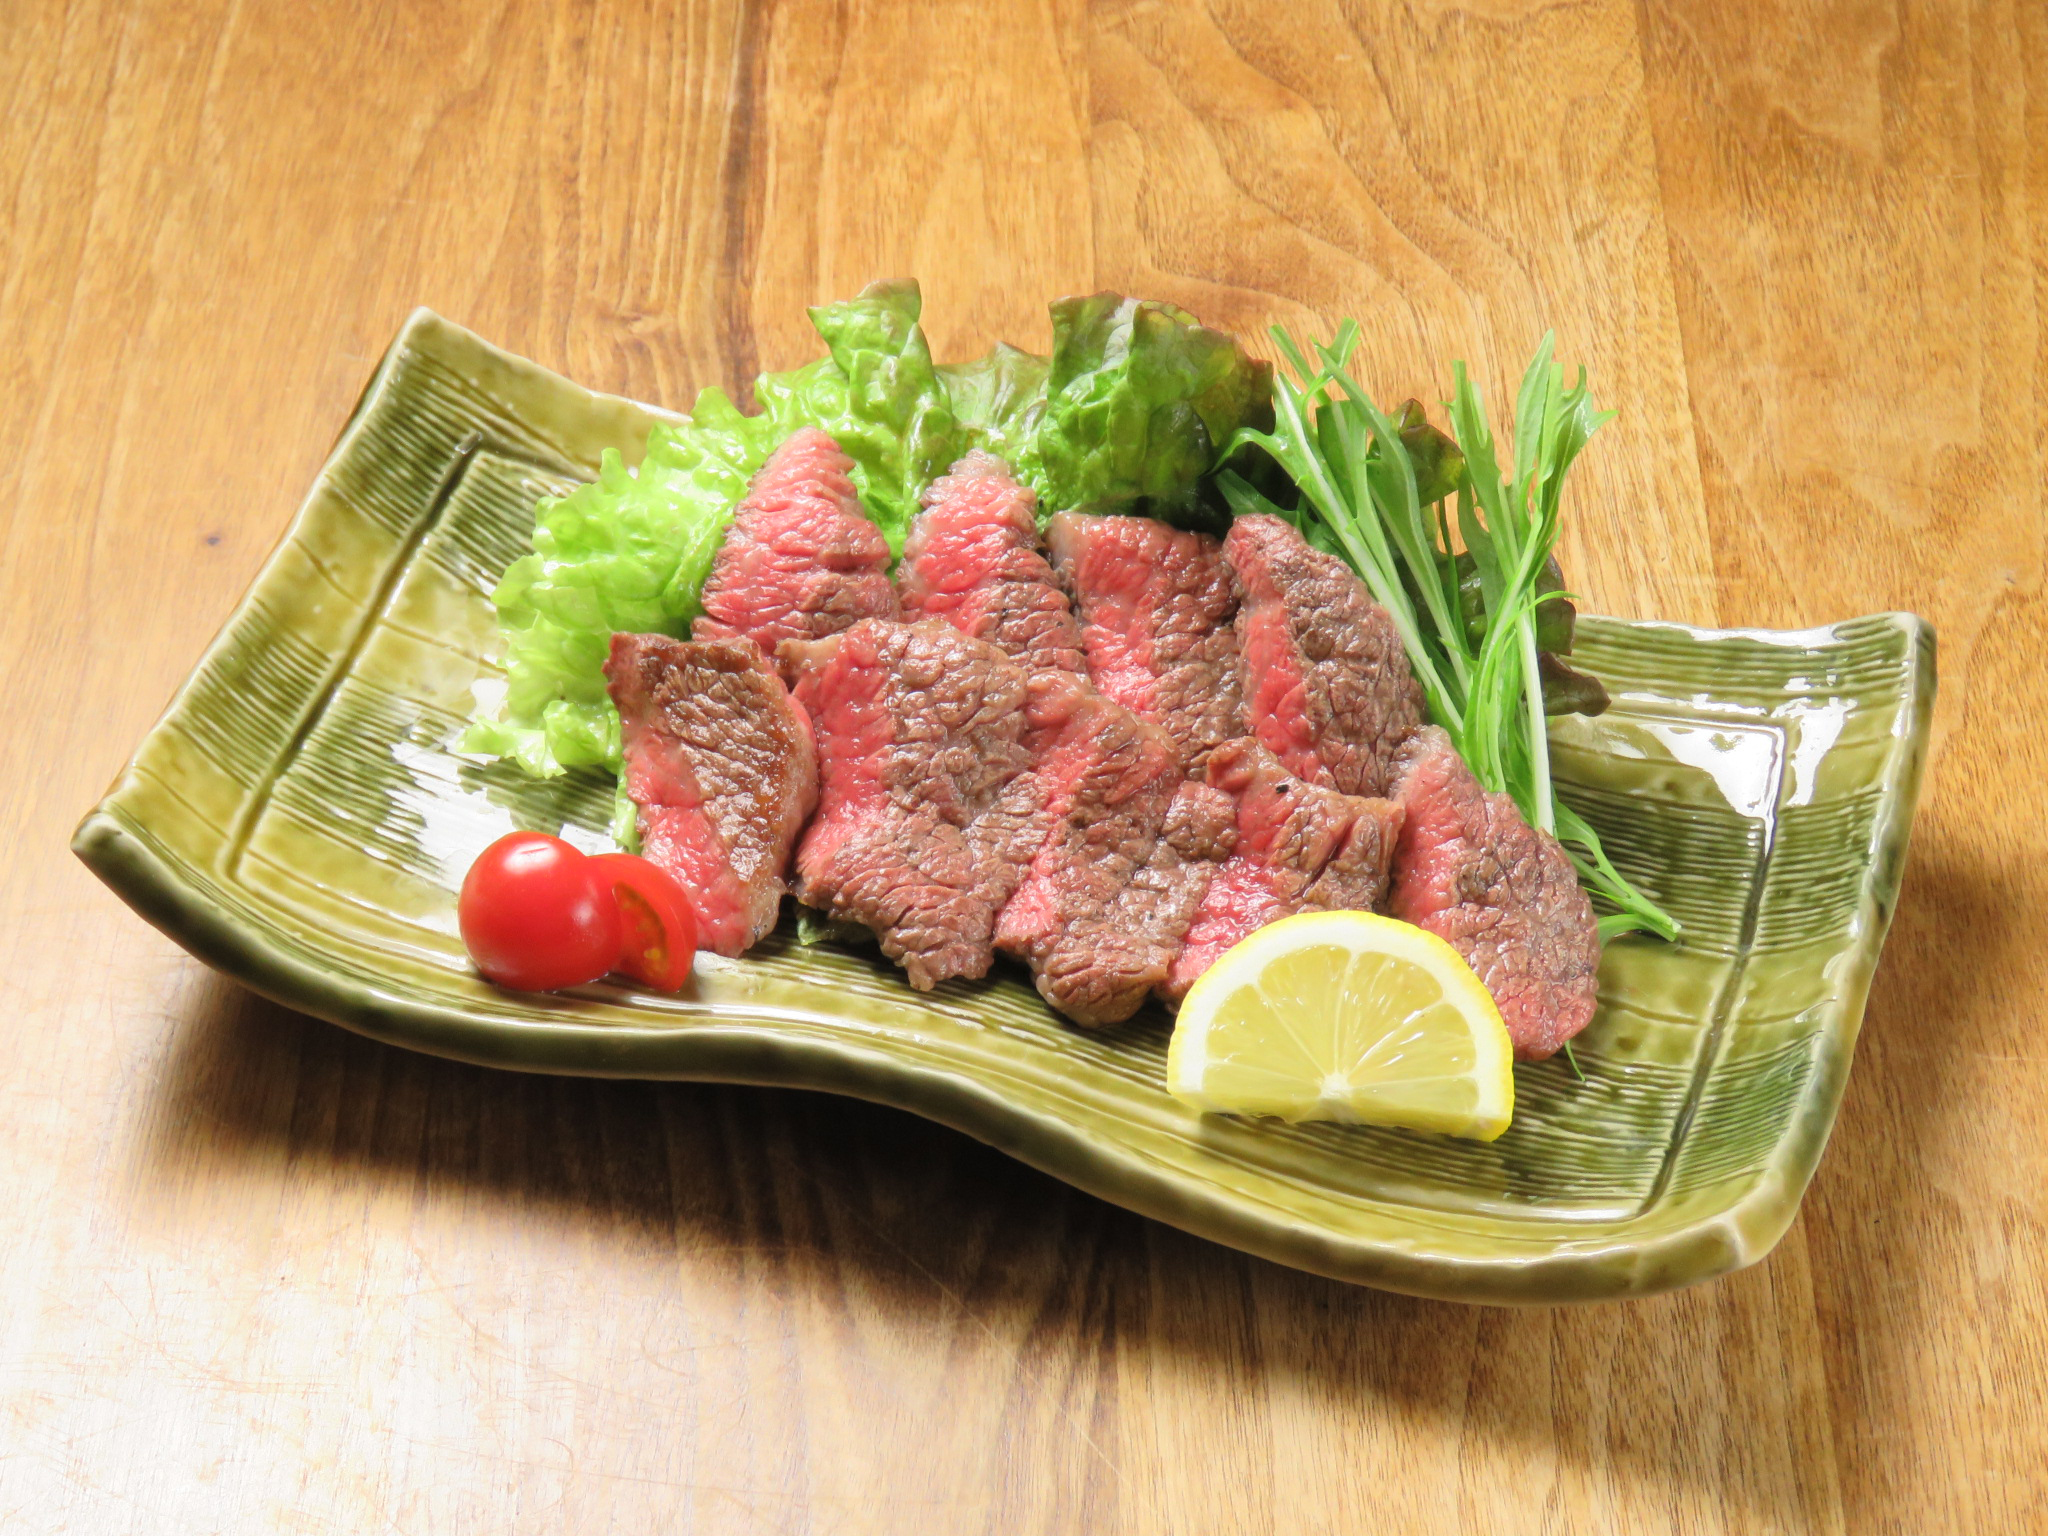 Charcoal grilled Wagyu beef